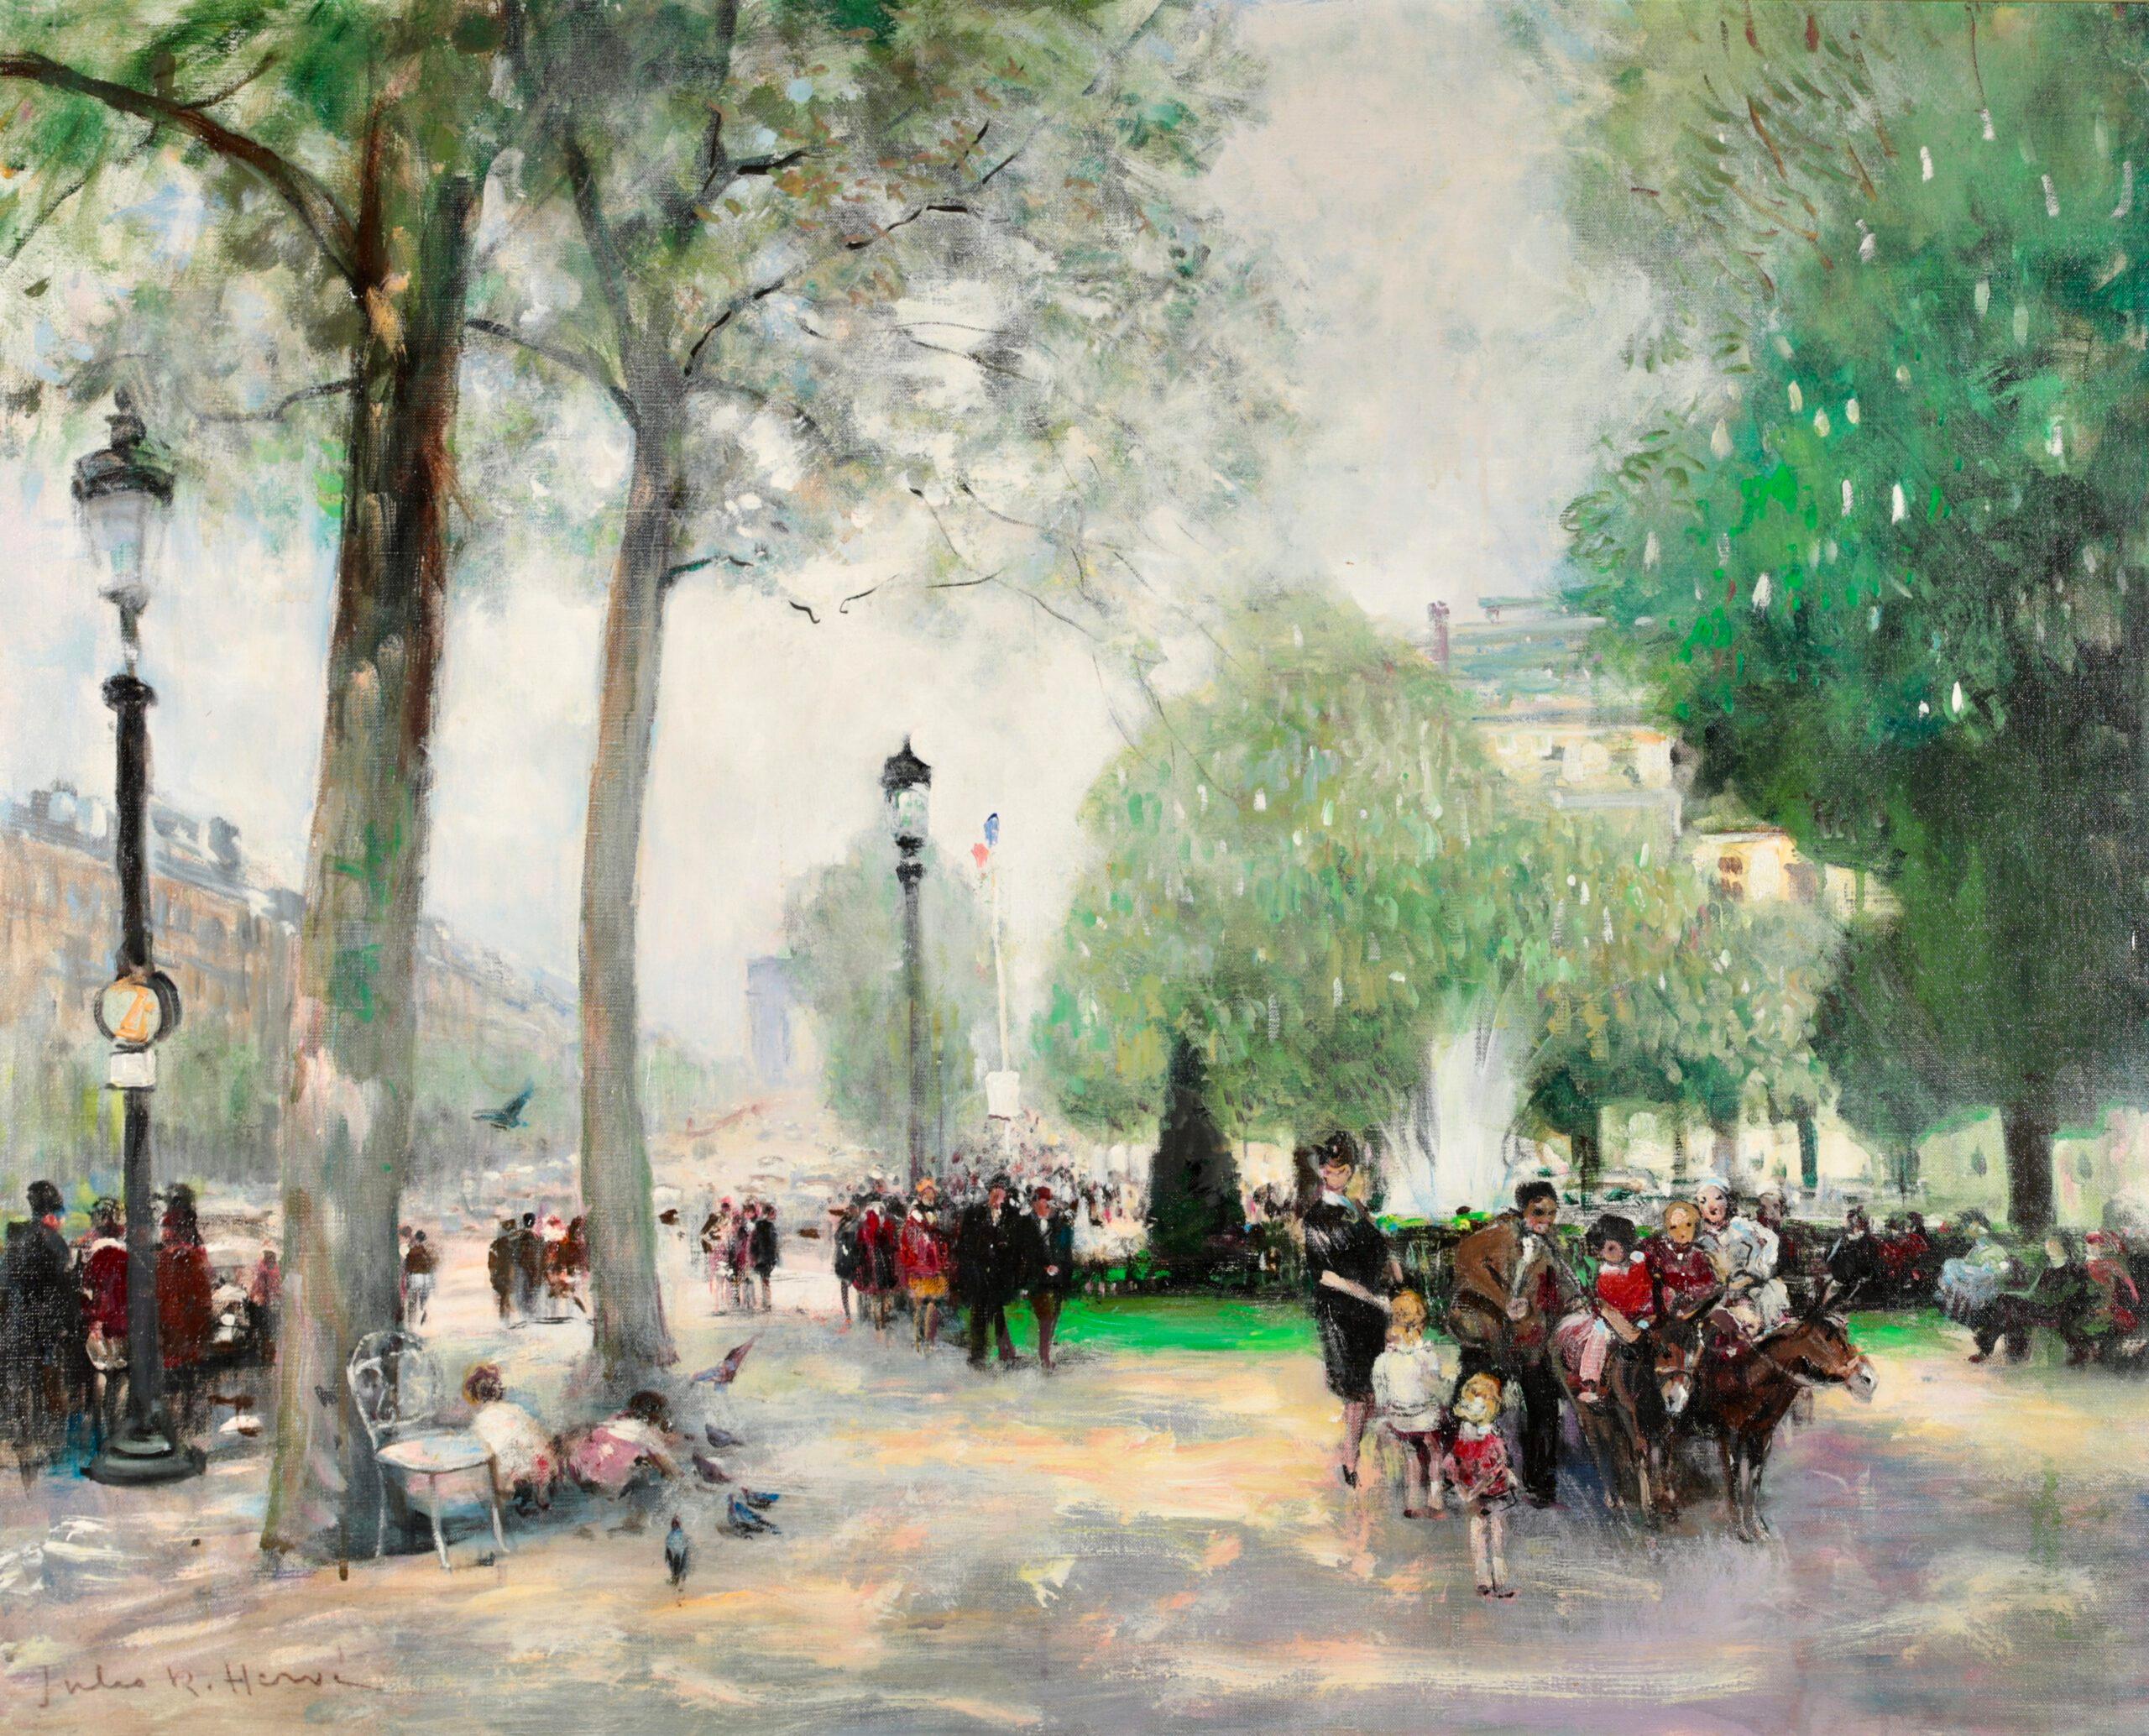 Signed figures and animals in cityscape oil on canvas circa 1940 by French impressionist painter Jules Rene Herve. This large piece depicts a view of Paris on a bright summer's day. Children enjoy donkey rides in the shade of the green trees and